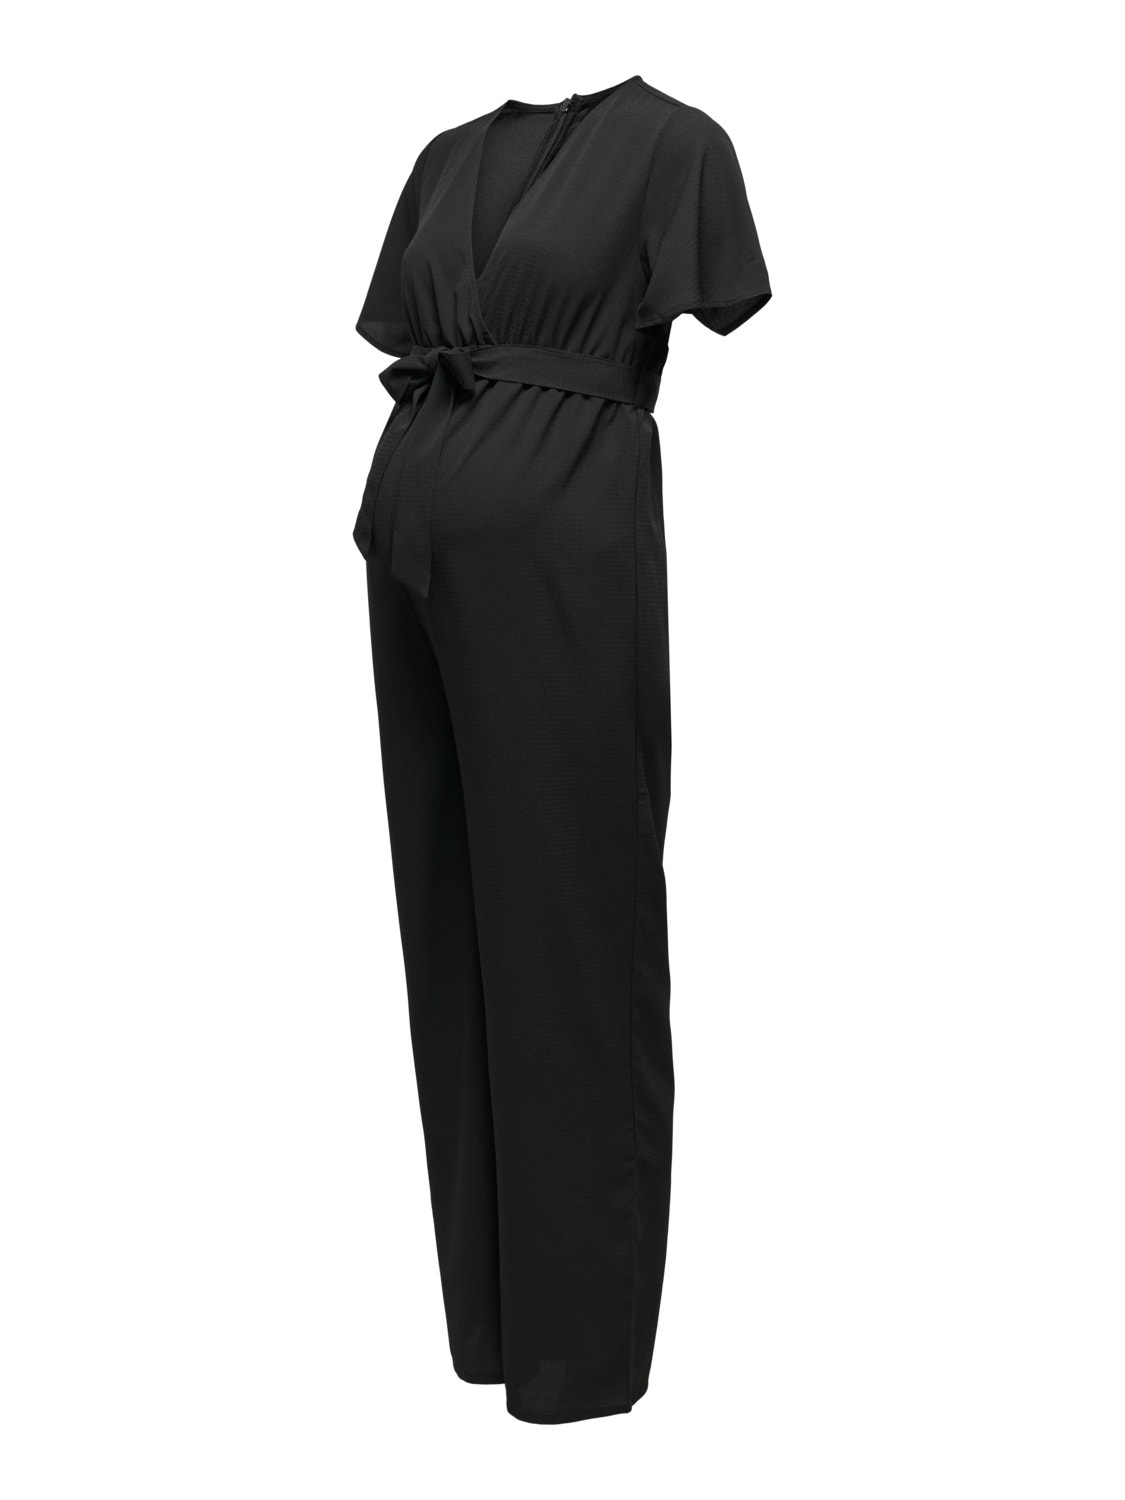 ONLY Maternity Jumpsuit -Black - 15302109